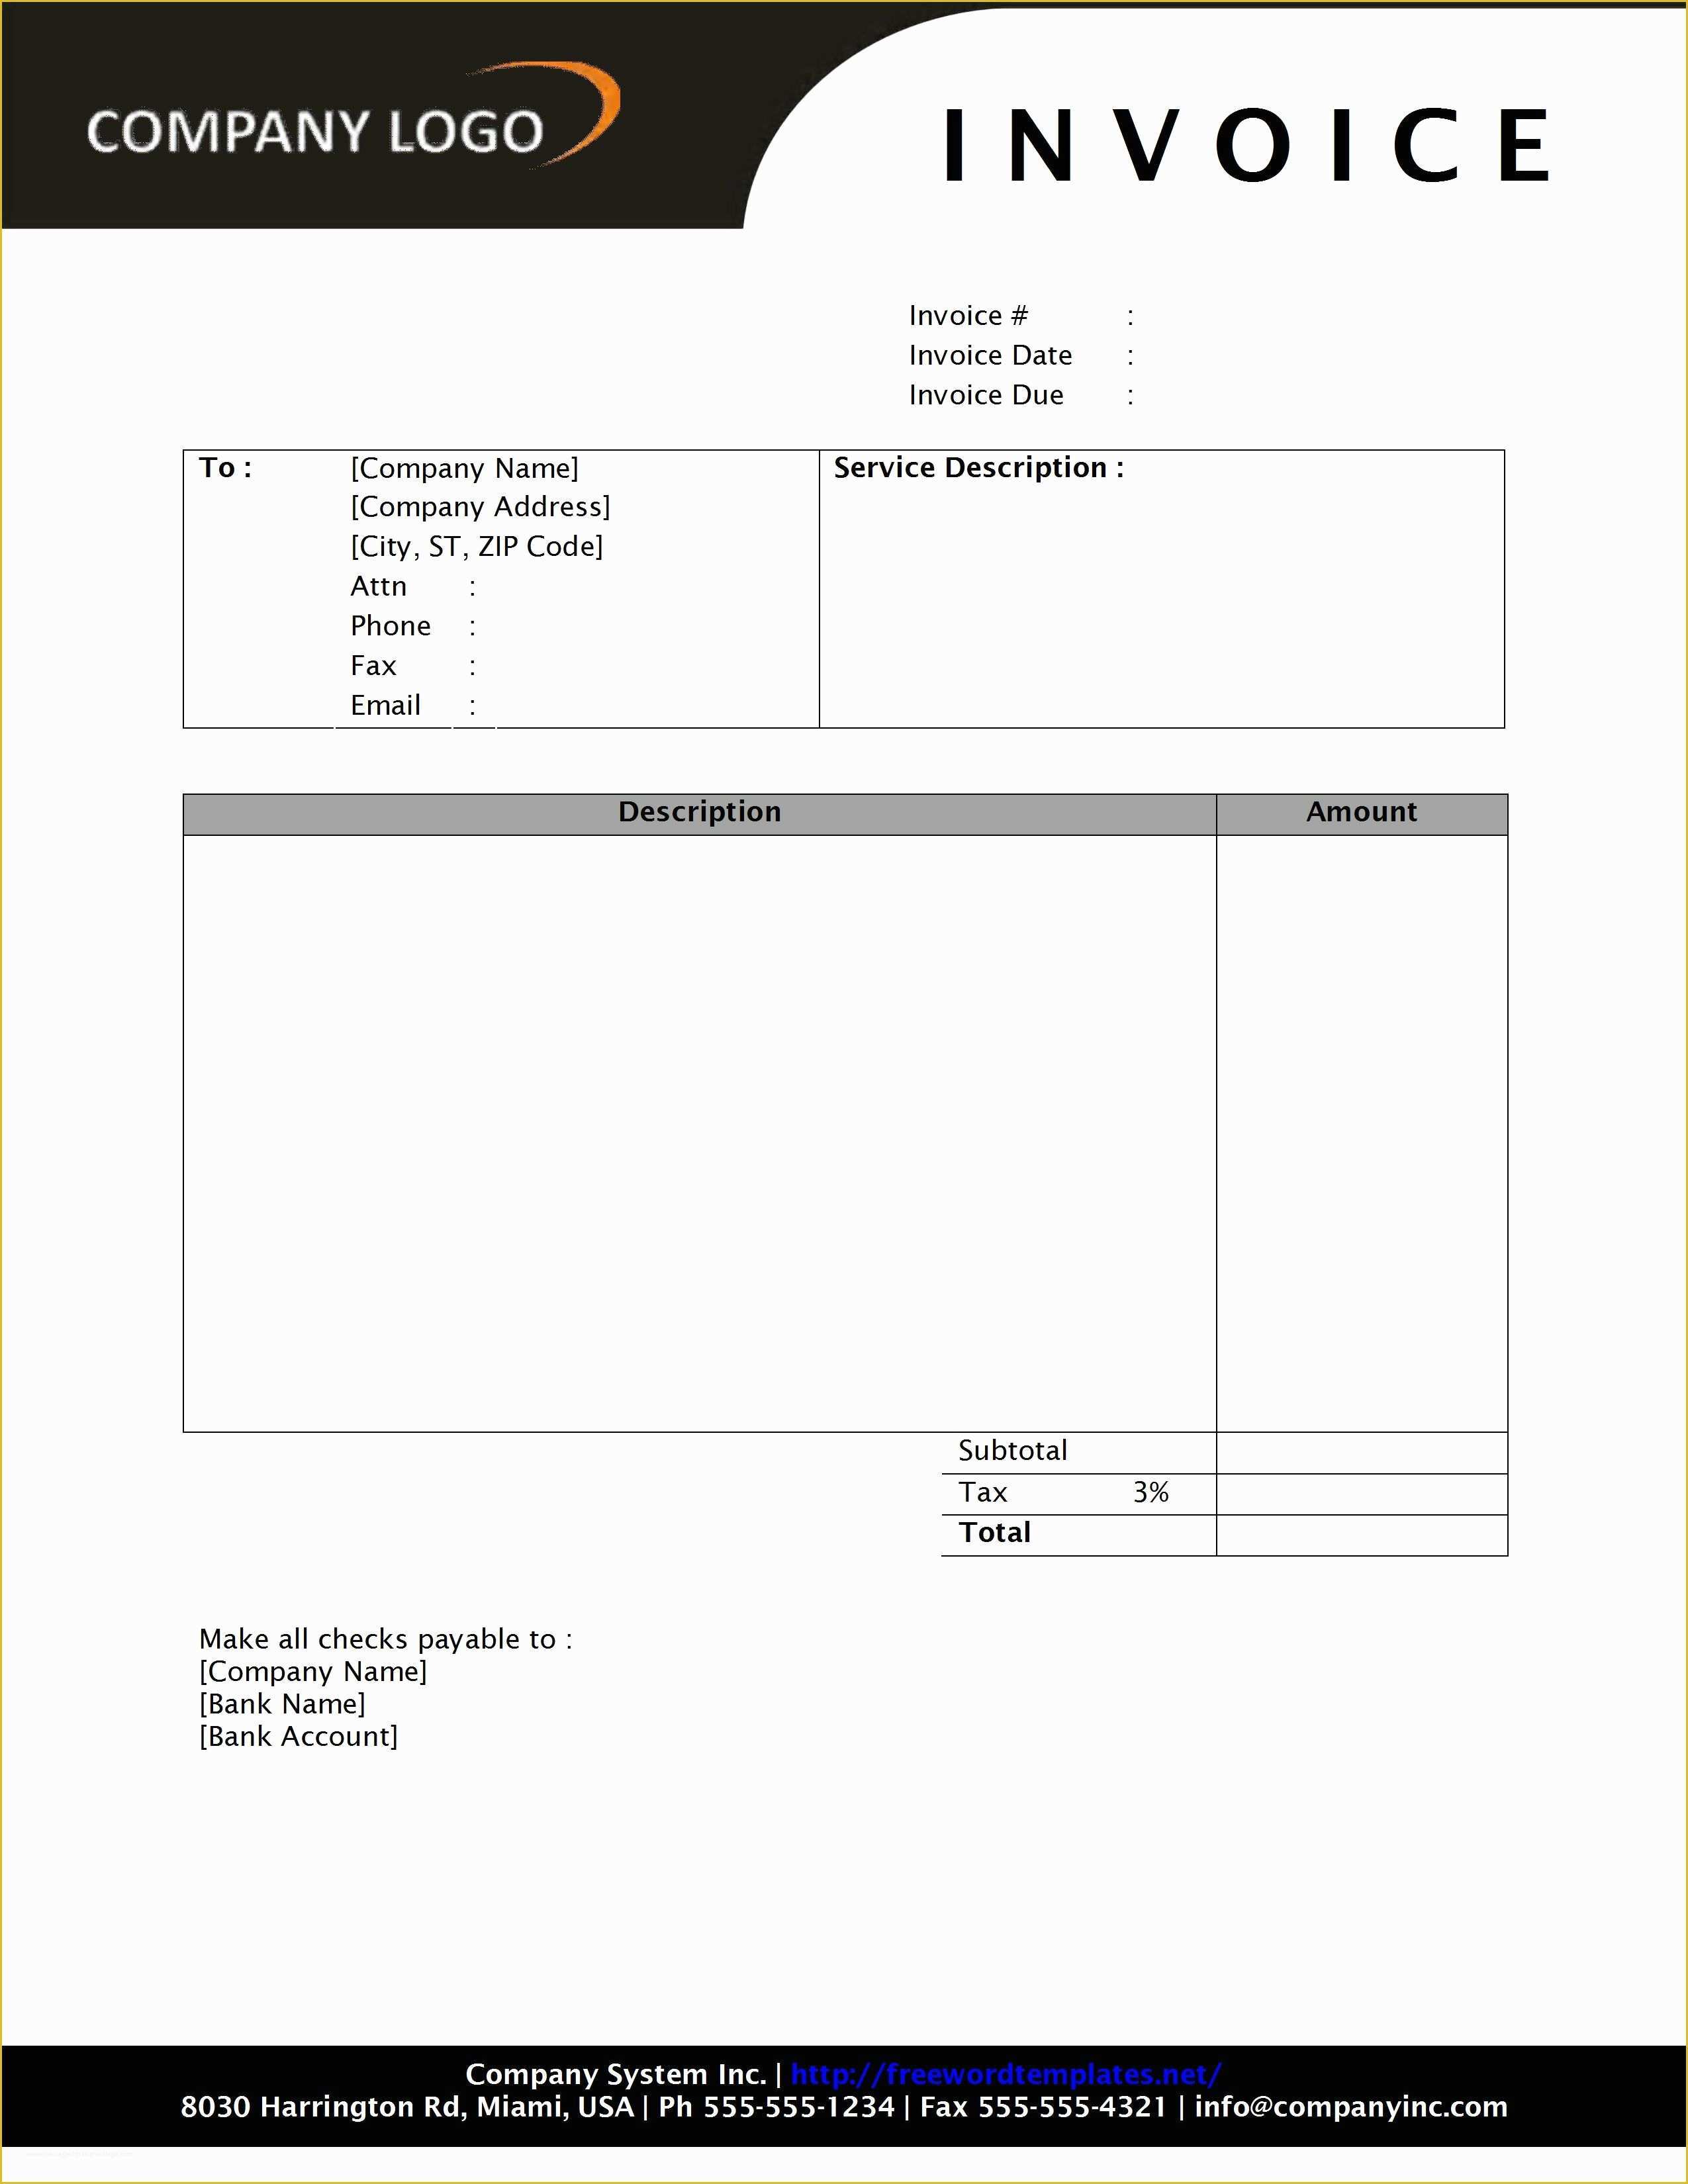 Microsoft Office Free Invoice Template Of Invoice Template Word 2010